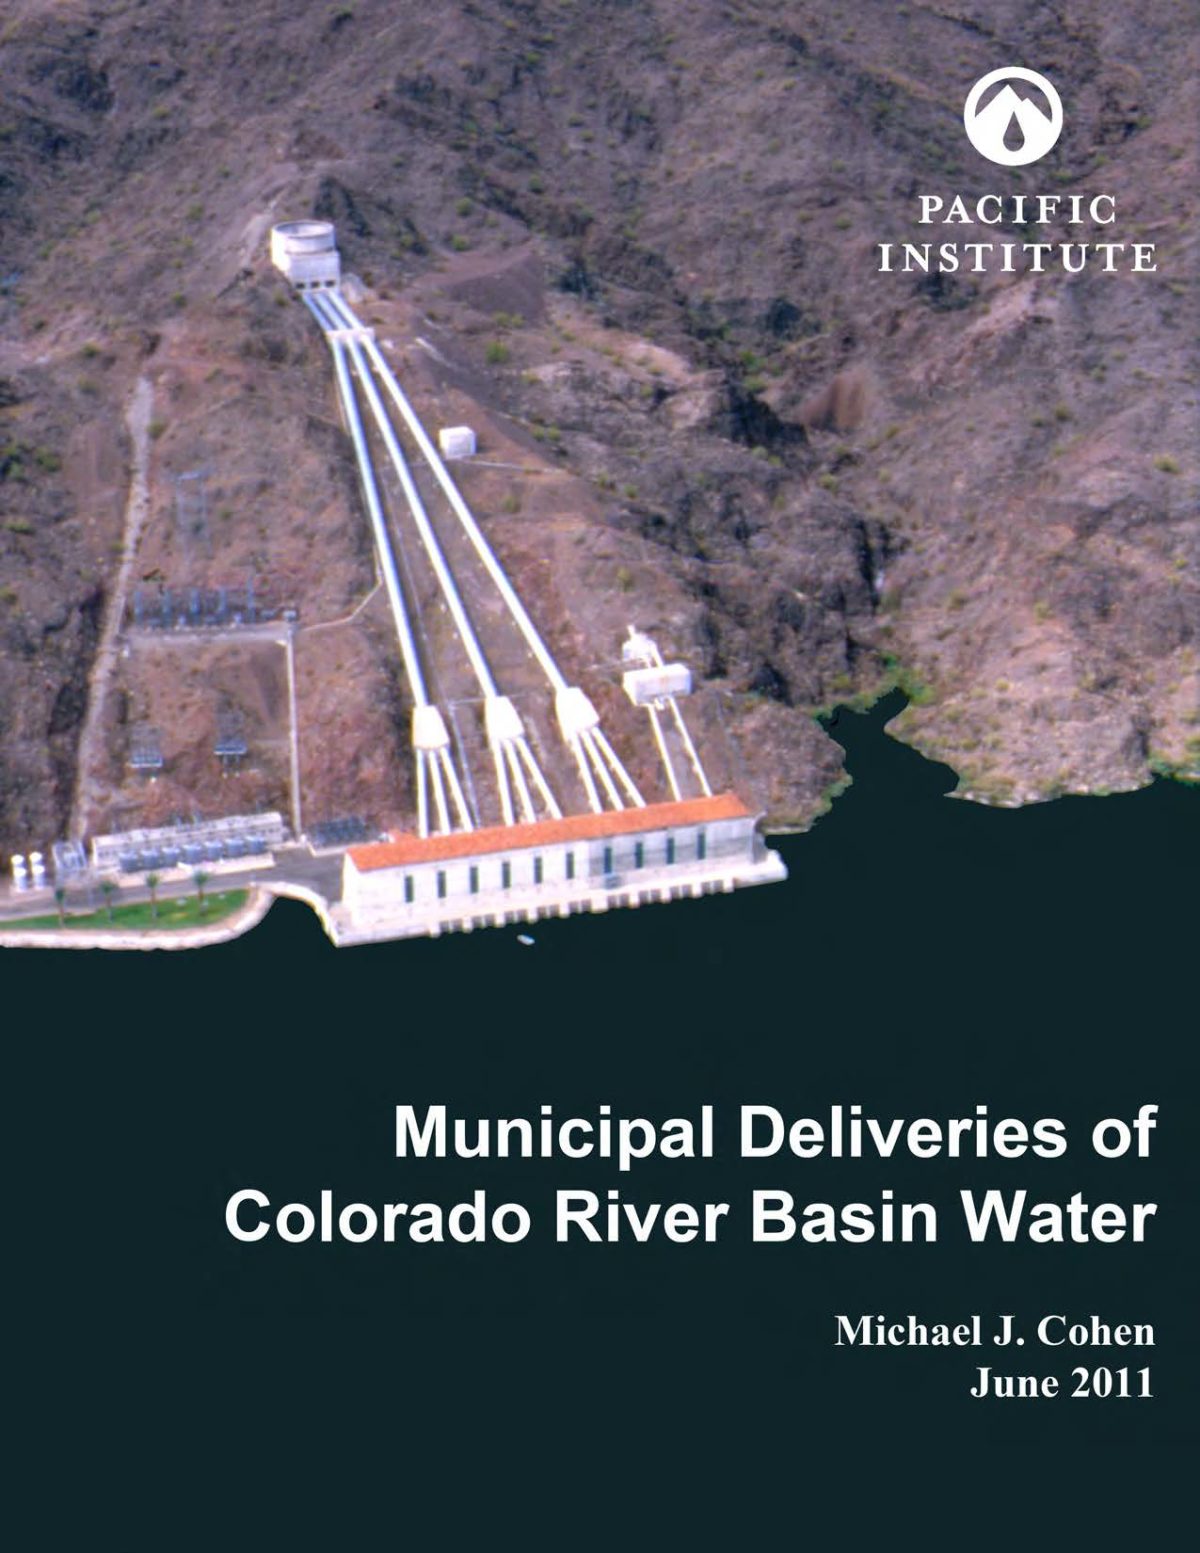 Municipal Deliveries of Colorado River Basin Water: New Report Examines 100 Cities and Agencies